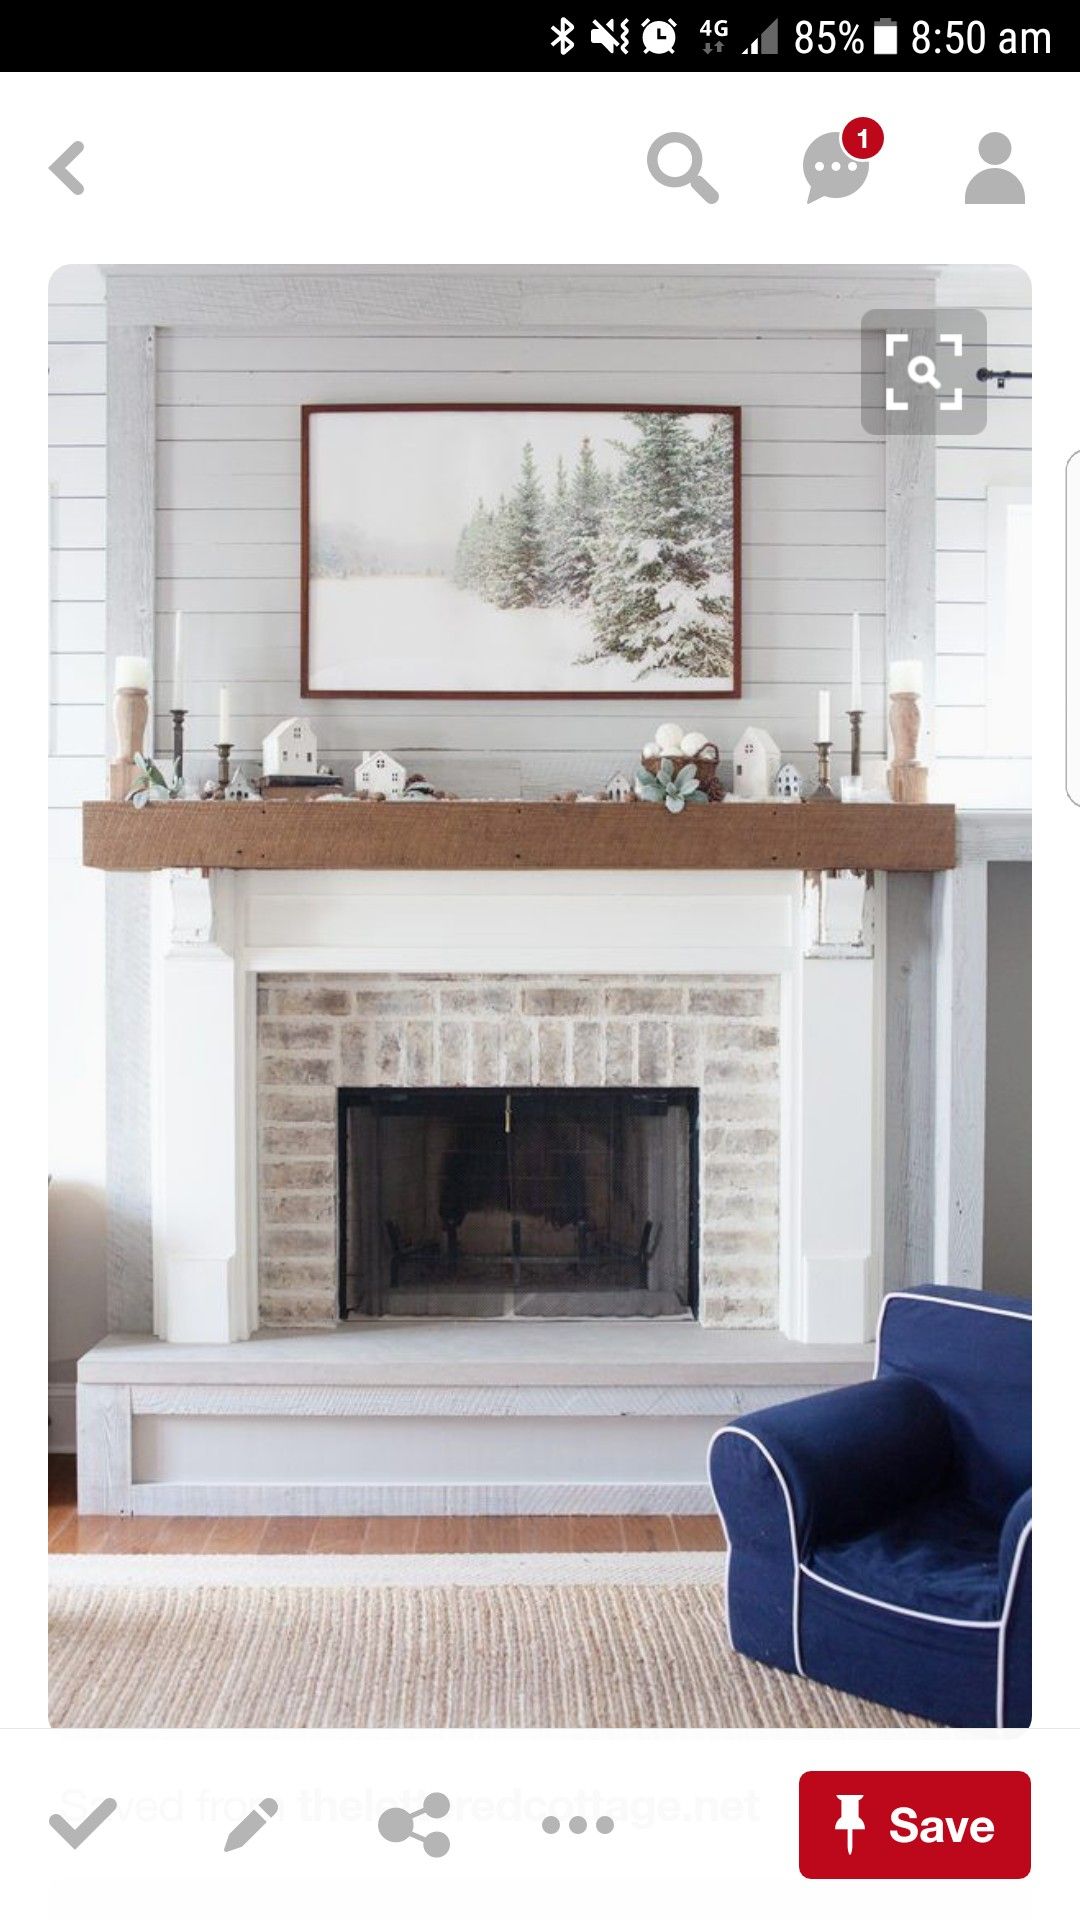 Fireplaces Birmingham Awesome Imagine This sort Of Look for Our Range Hood Brick Shiplap